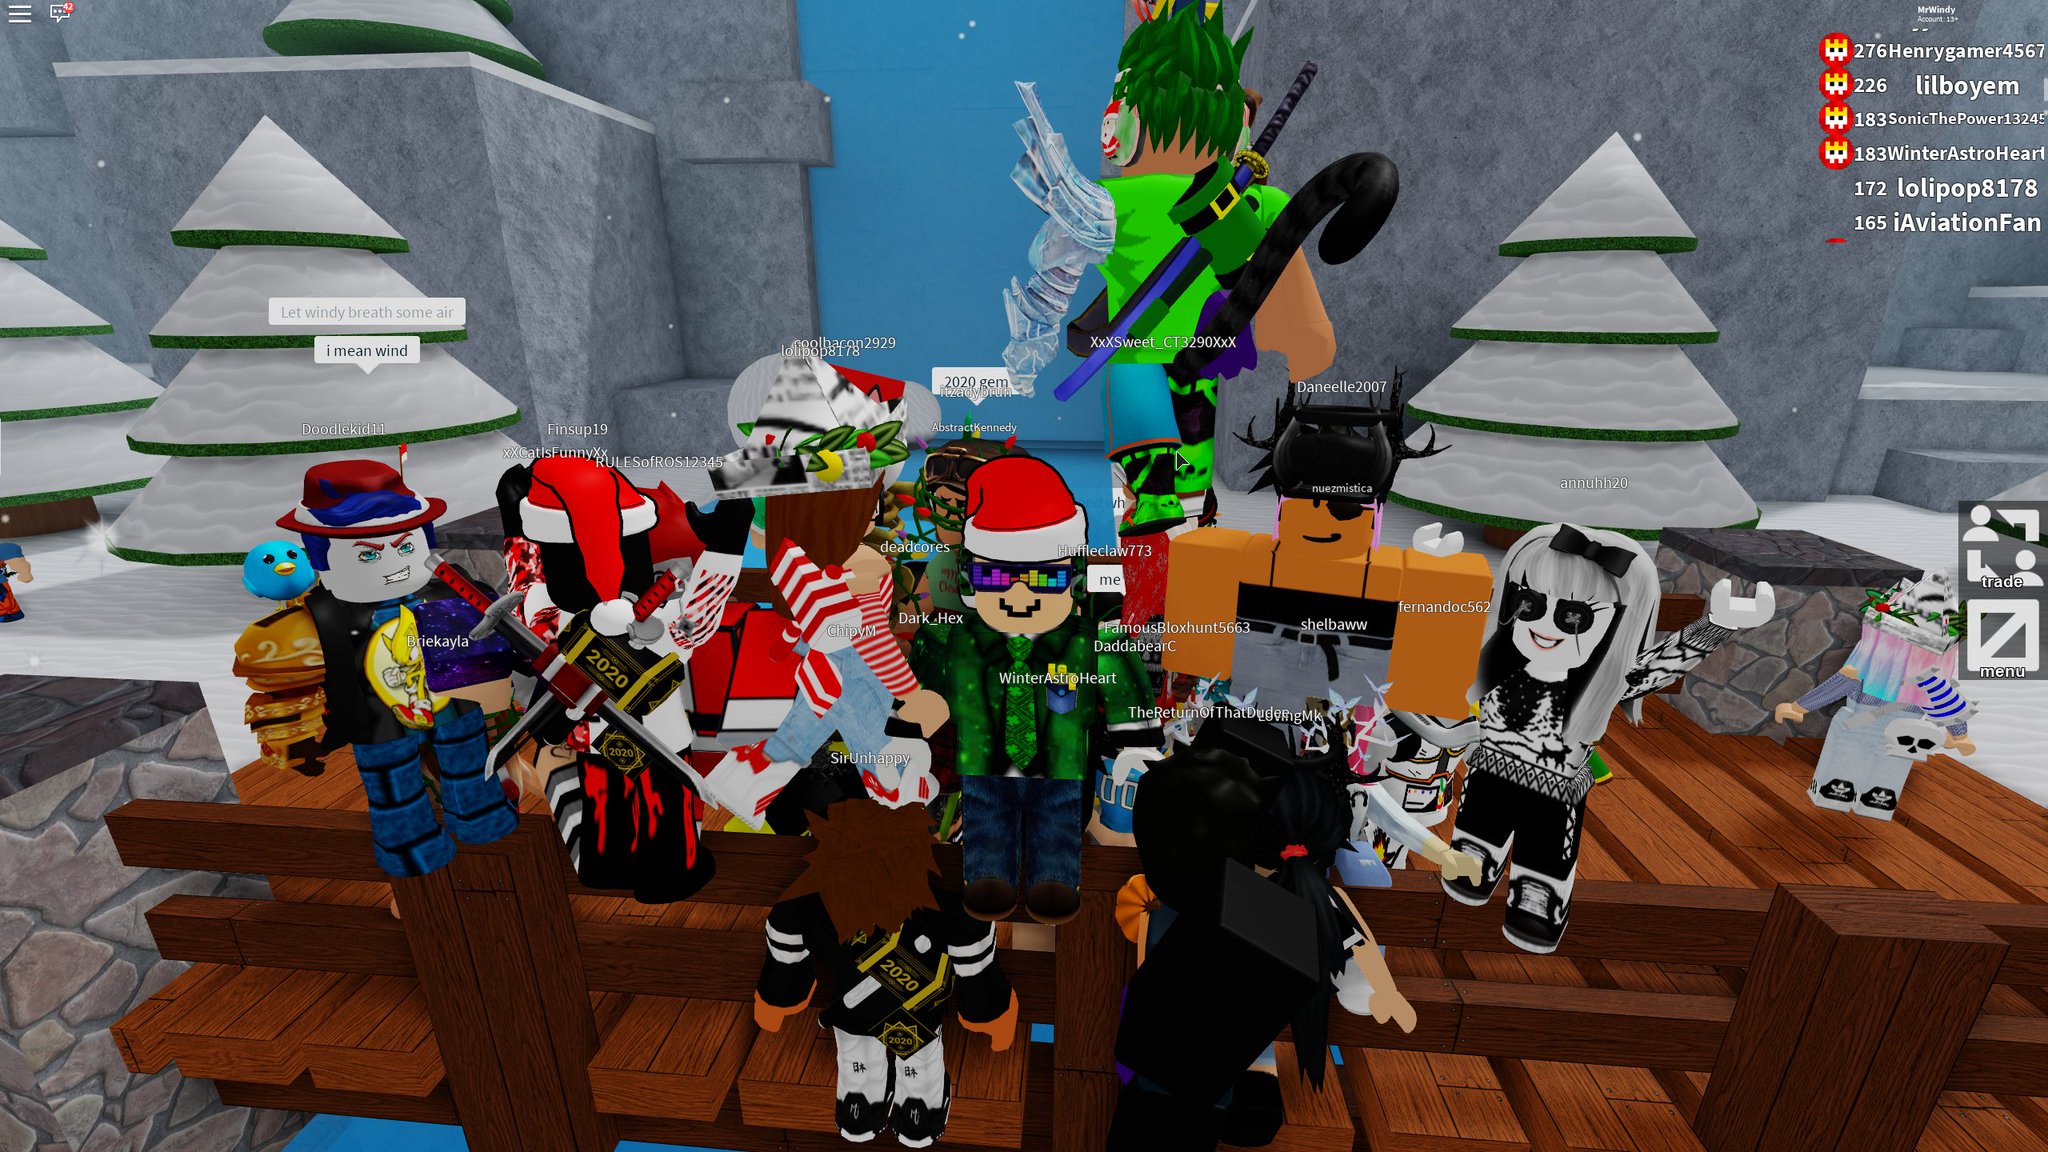 Andrew Mrwindy Willeitner On Twitter Happy Holidays Time For Some Fun In The Snow And Christmas Cheer Https T Co Fi4u4vhfzh - disable roblox roblox flee the facility nightfoxx